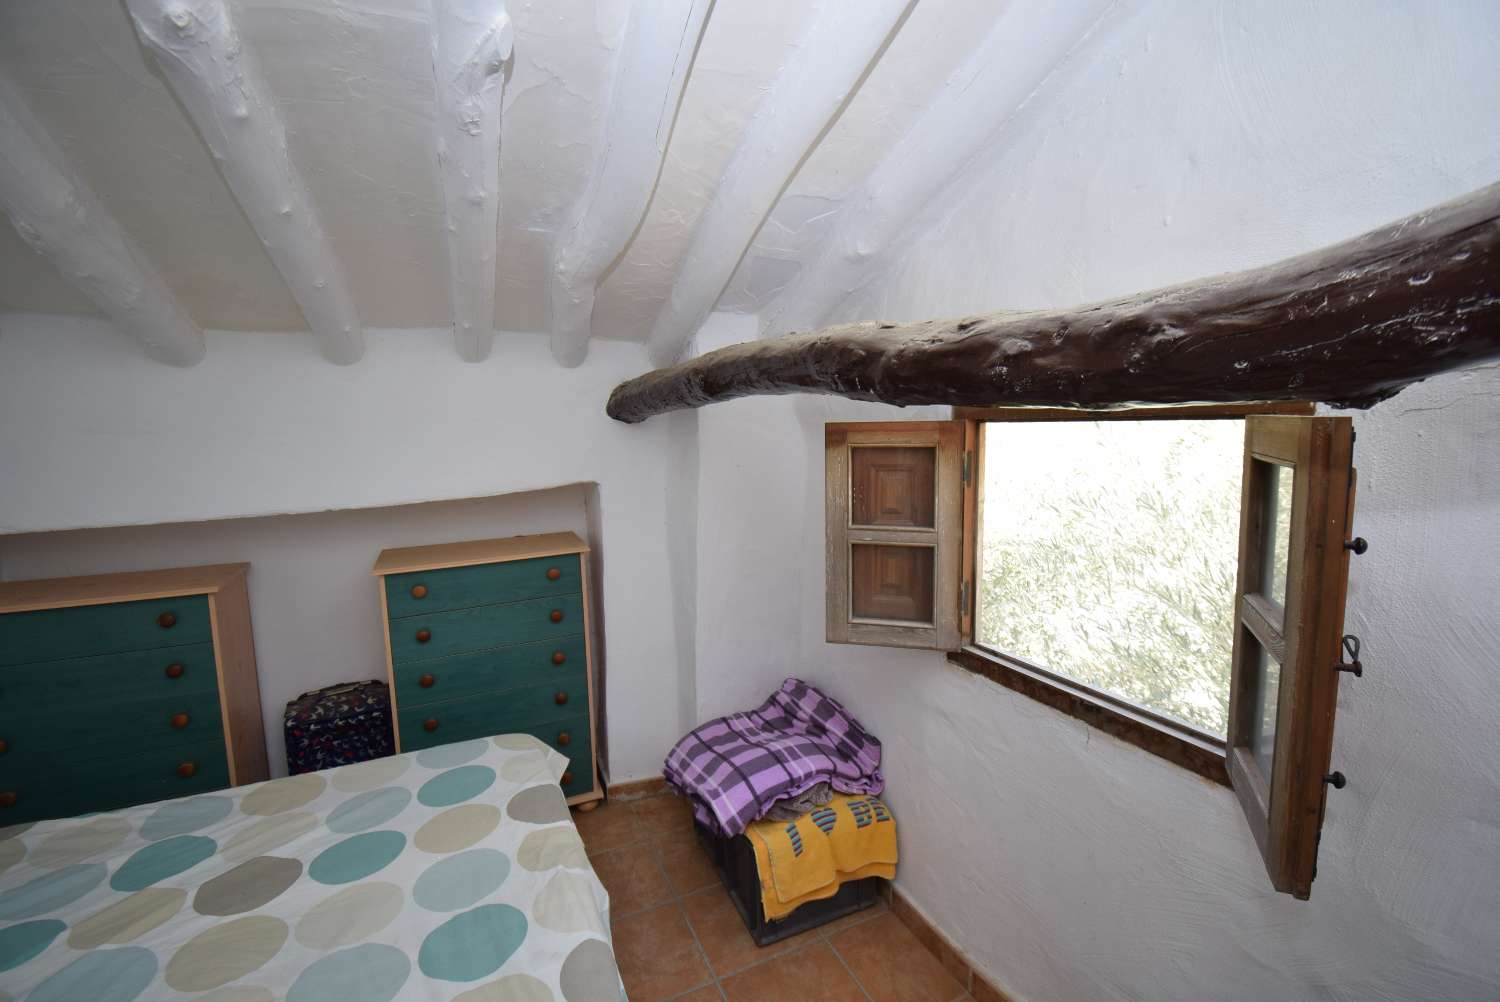 2 BED COTTAGE WITH SEPARATE ANNEX EN-SUITE  WITH STUNNING VIEWS